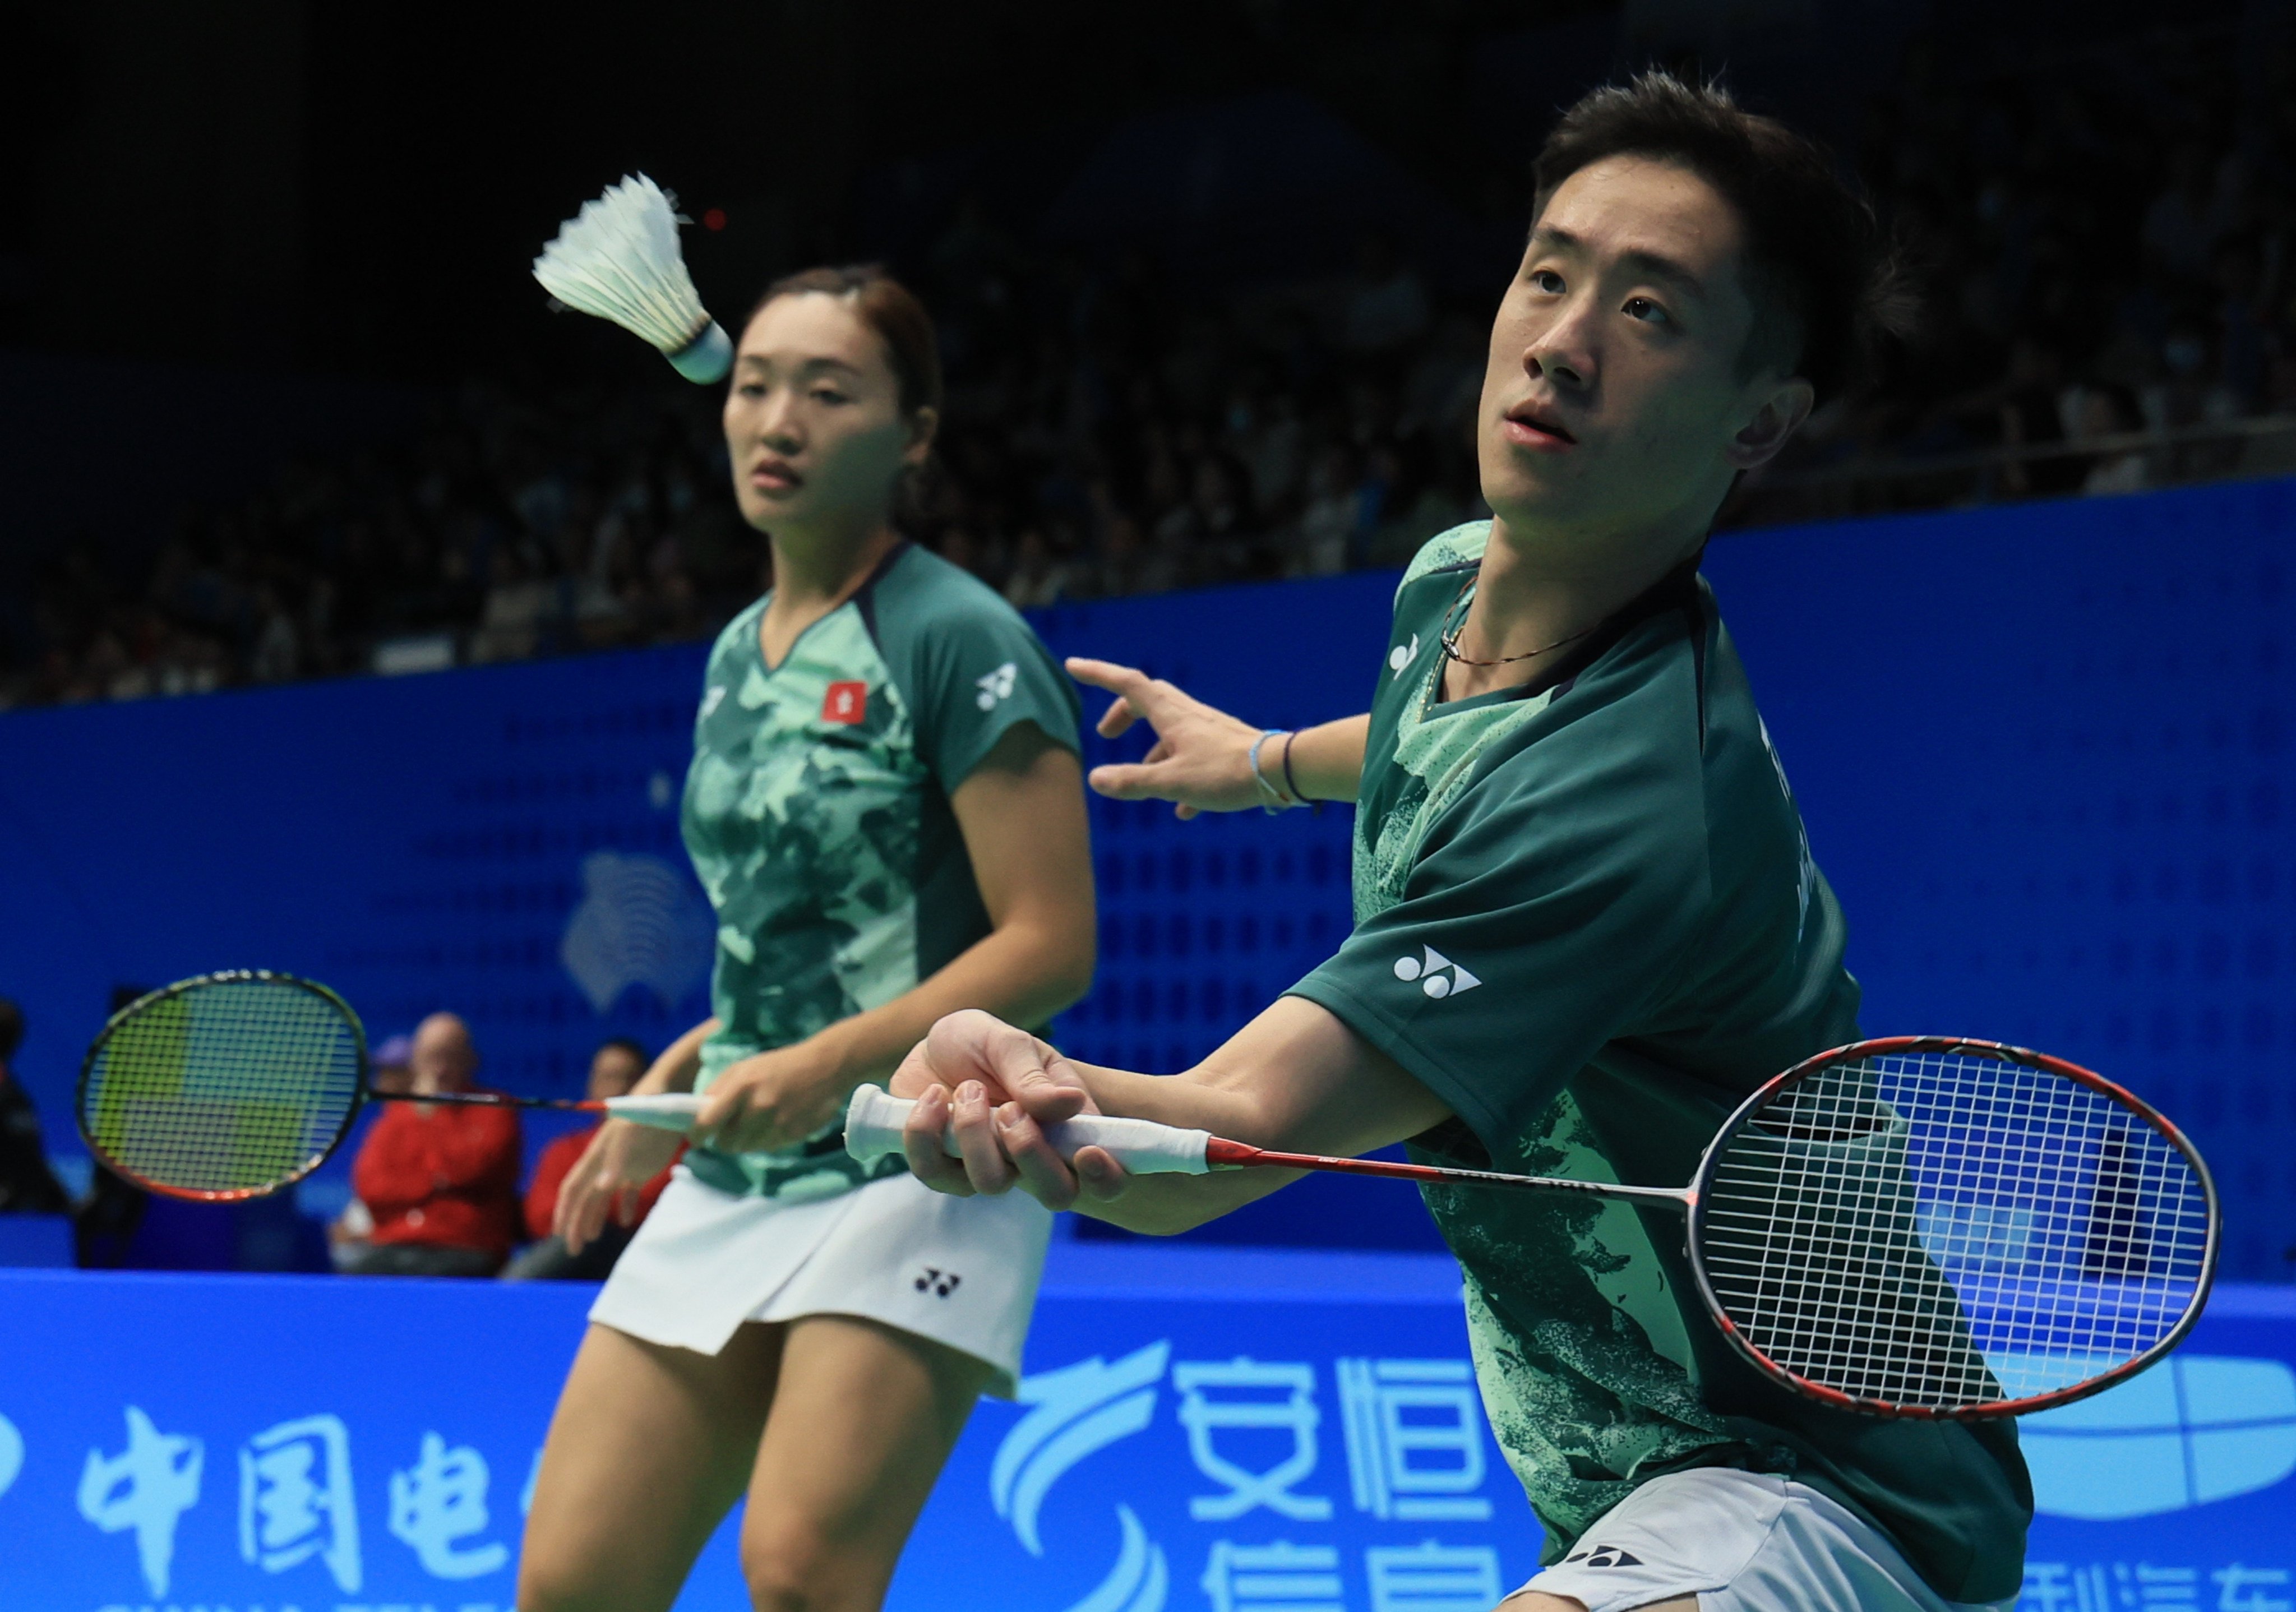 Tse Ying-suet (left) and mixed-doubles partner Tang Chun-man in action at the Asian Games in Hangzhou. Photo: Dickson Lee